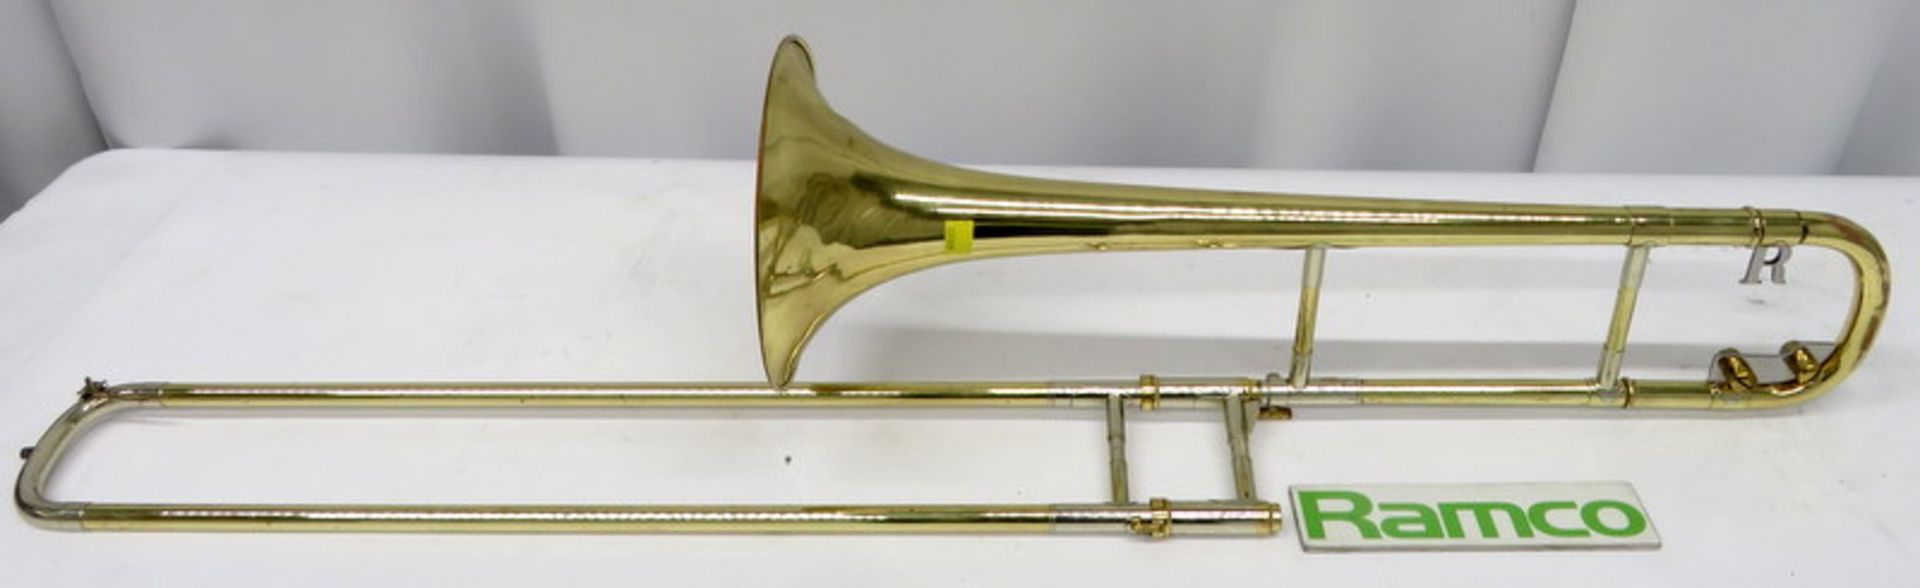 Rath R3 Trombone With Case. Serial Number:028.Please Note That This Item Has Not Be Tested - Image 3 of 15